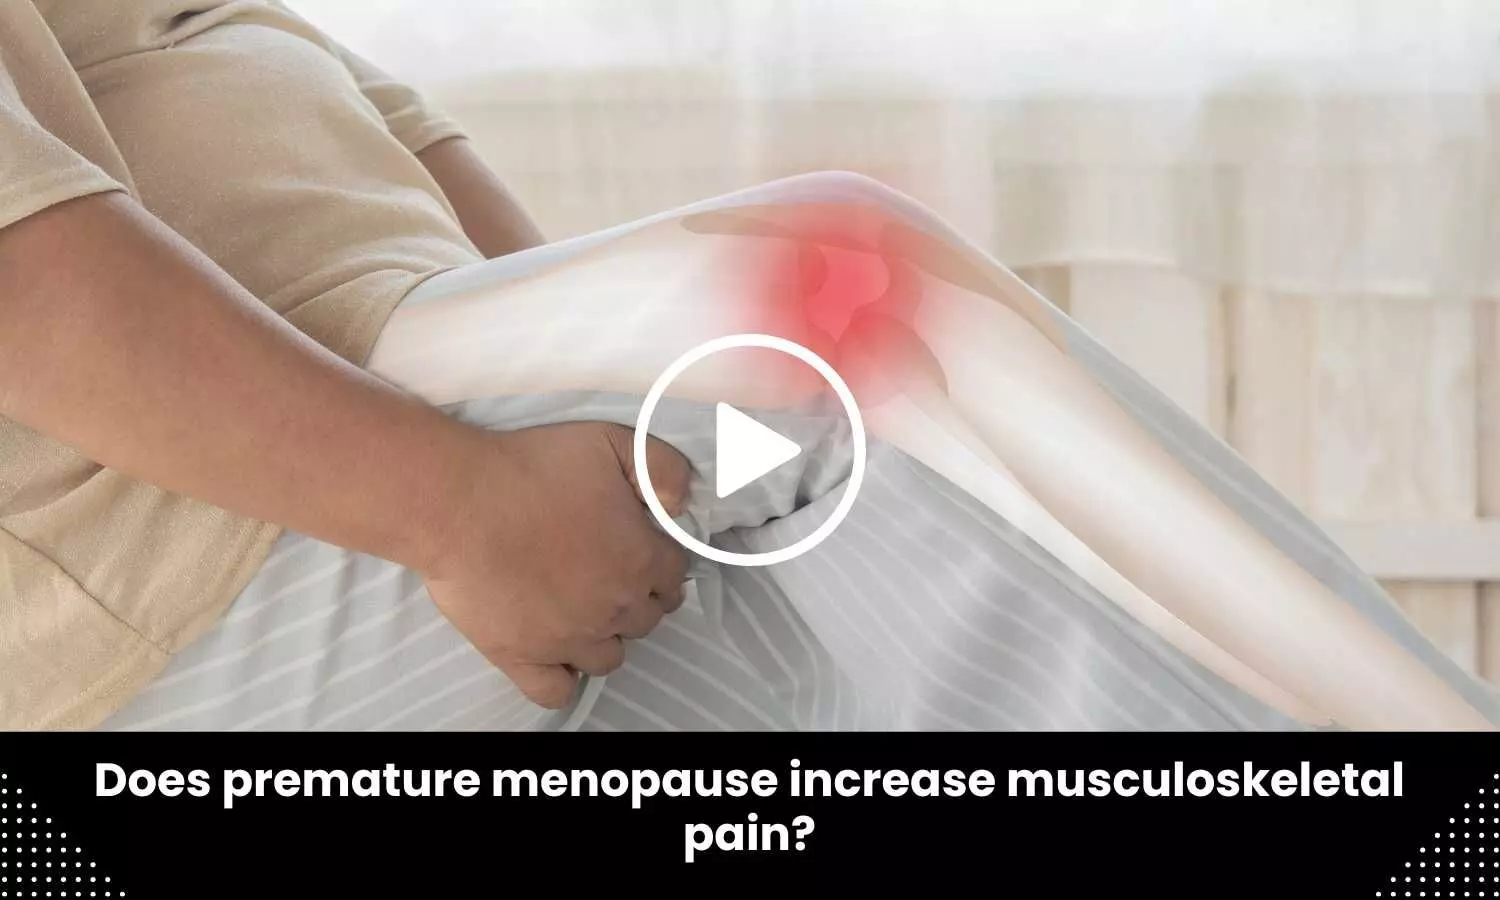 Does premature menopause increase musculoskeletal pain?